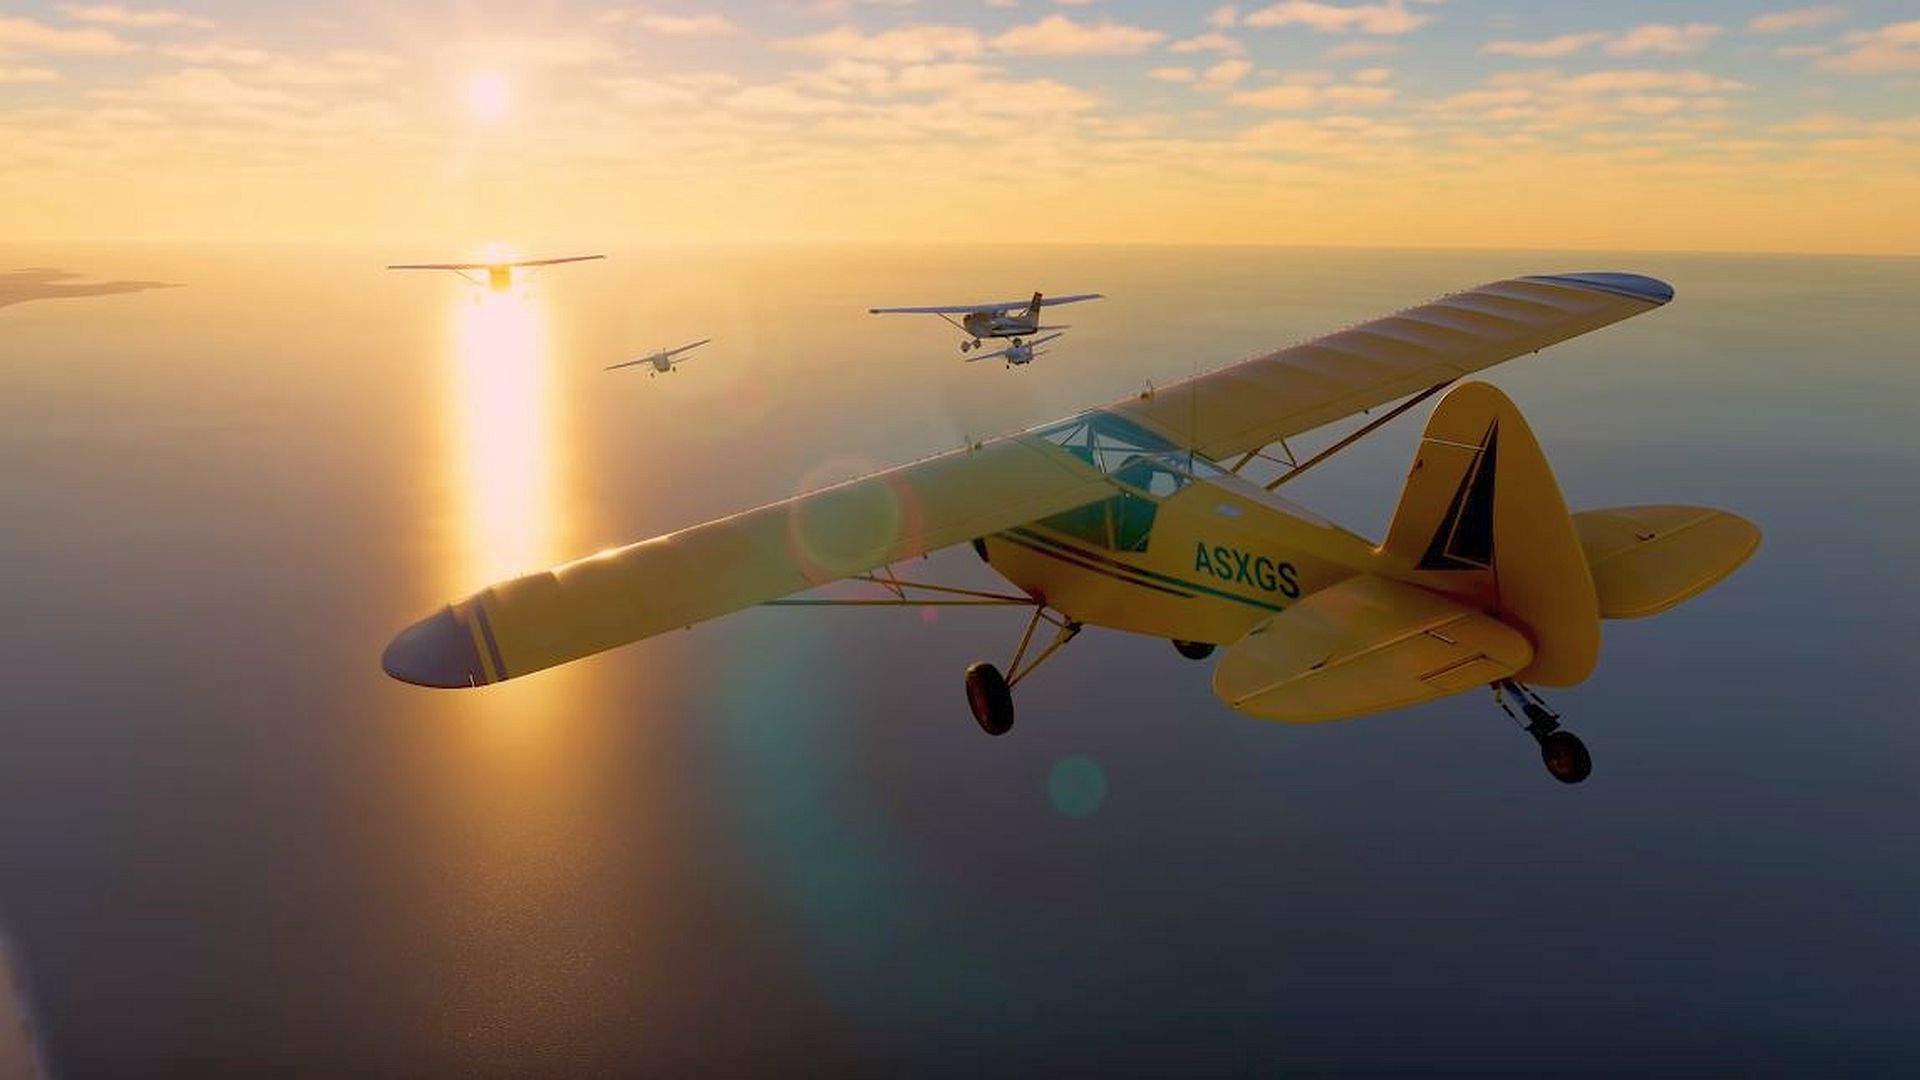 Microsoft Flight Simulator’s latest patch doesn’t just fix indestructible wing ice. But one of the biggest changes it makes won’t be noticed by 